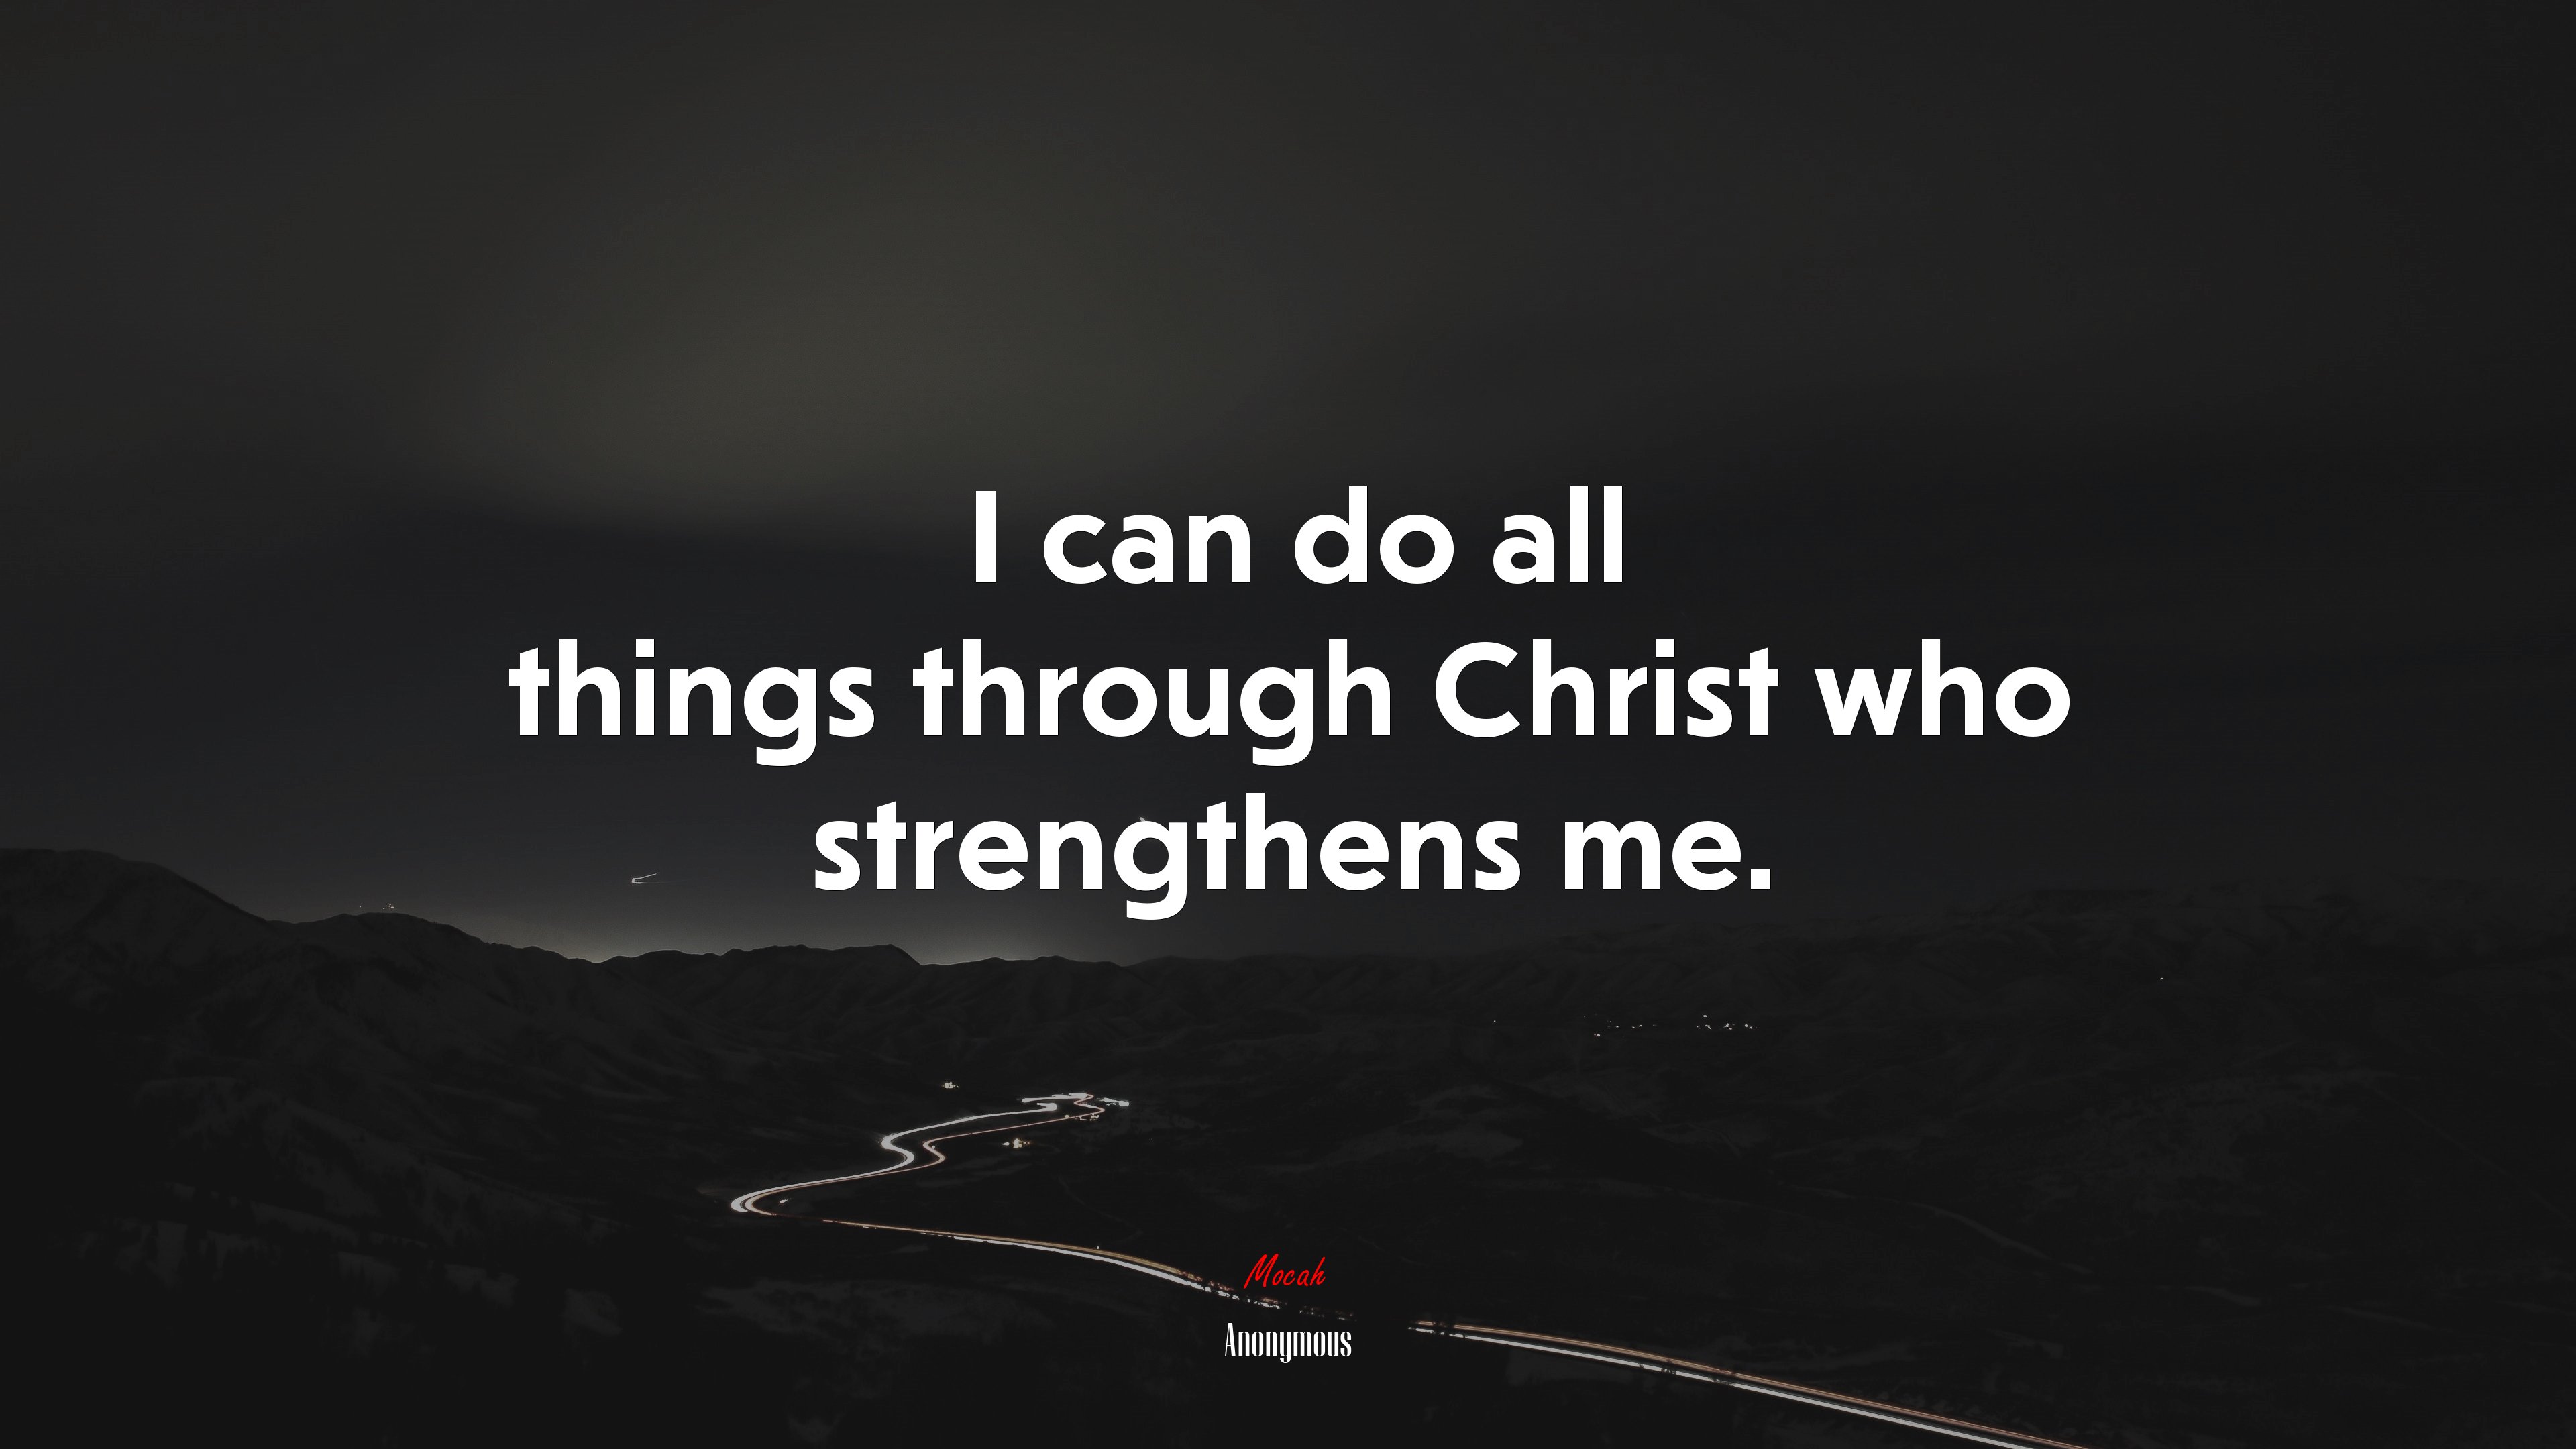 I can do all things through Christ who strengthens me. Anonymous quote Gallery HD Wallpaper